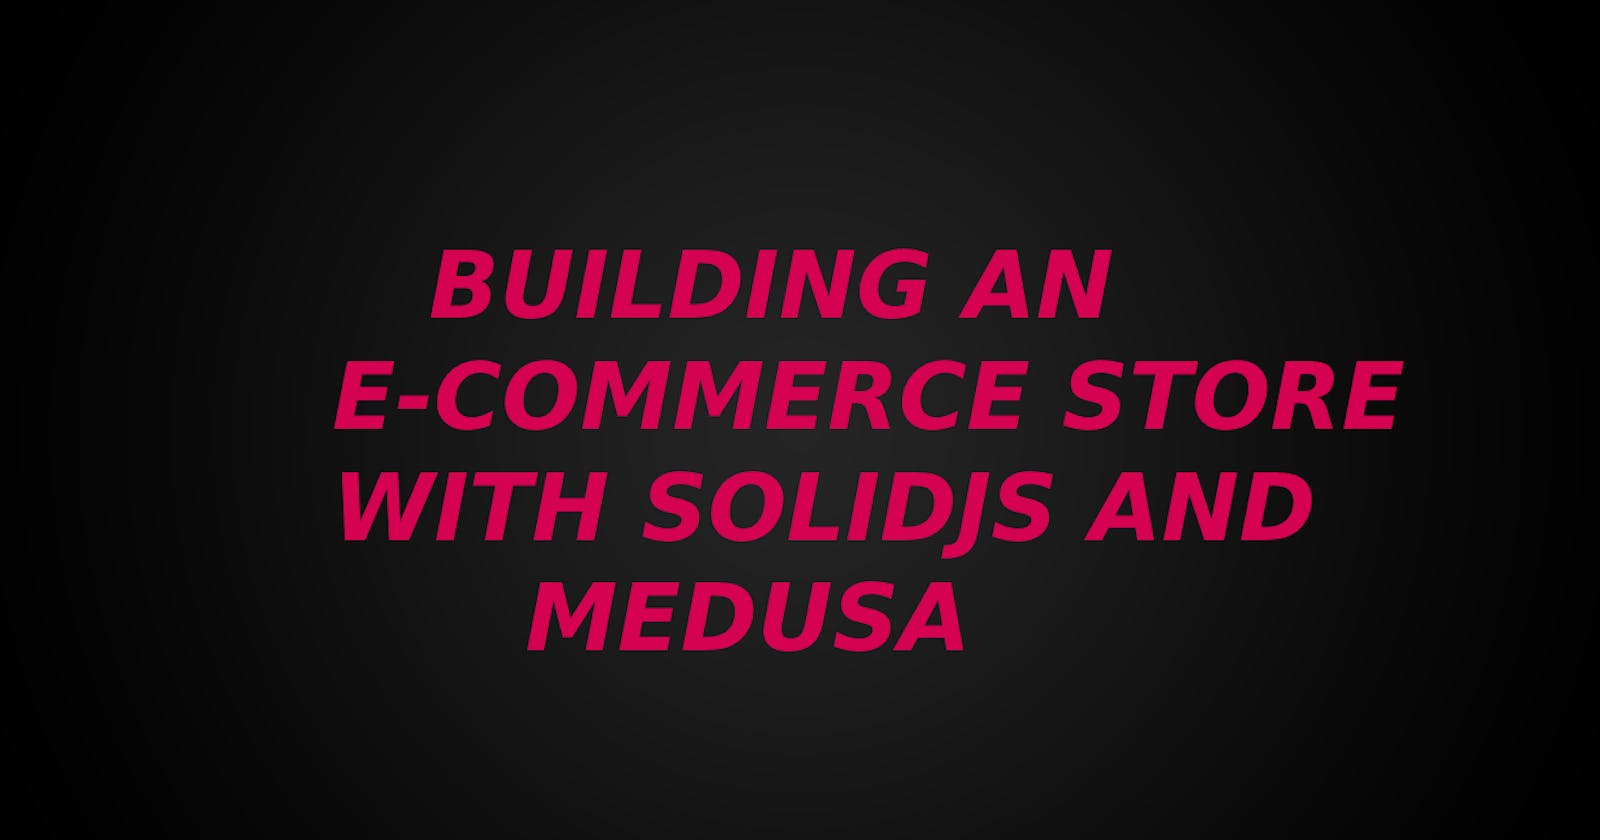 Building an E-commerce Store: A Step-by-Step Guide with Solidjs and Medusa